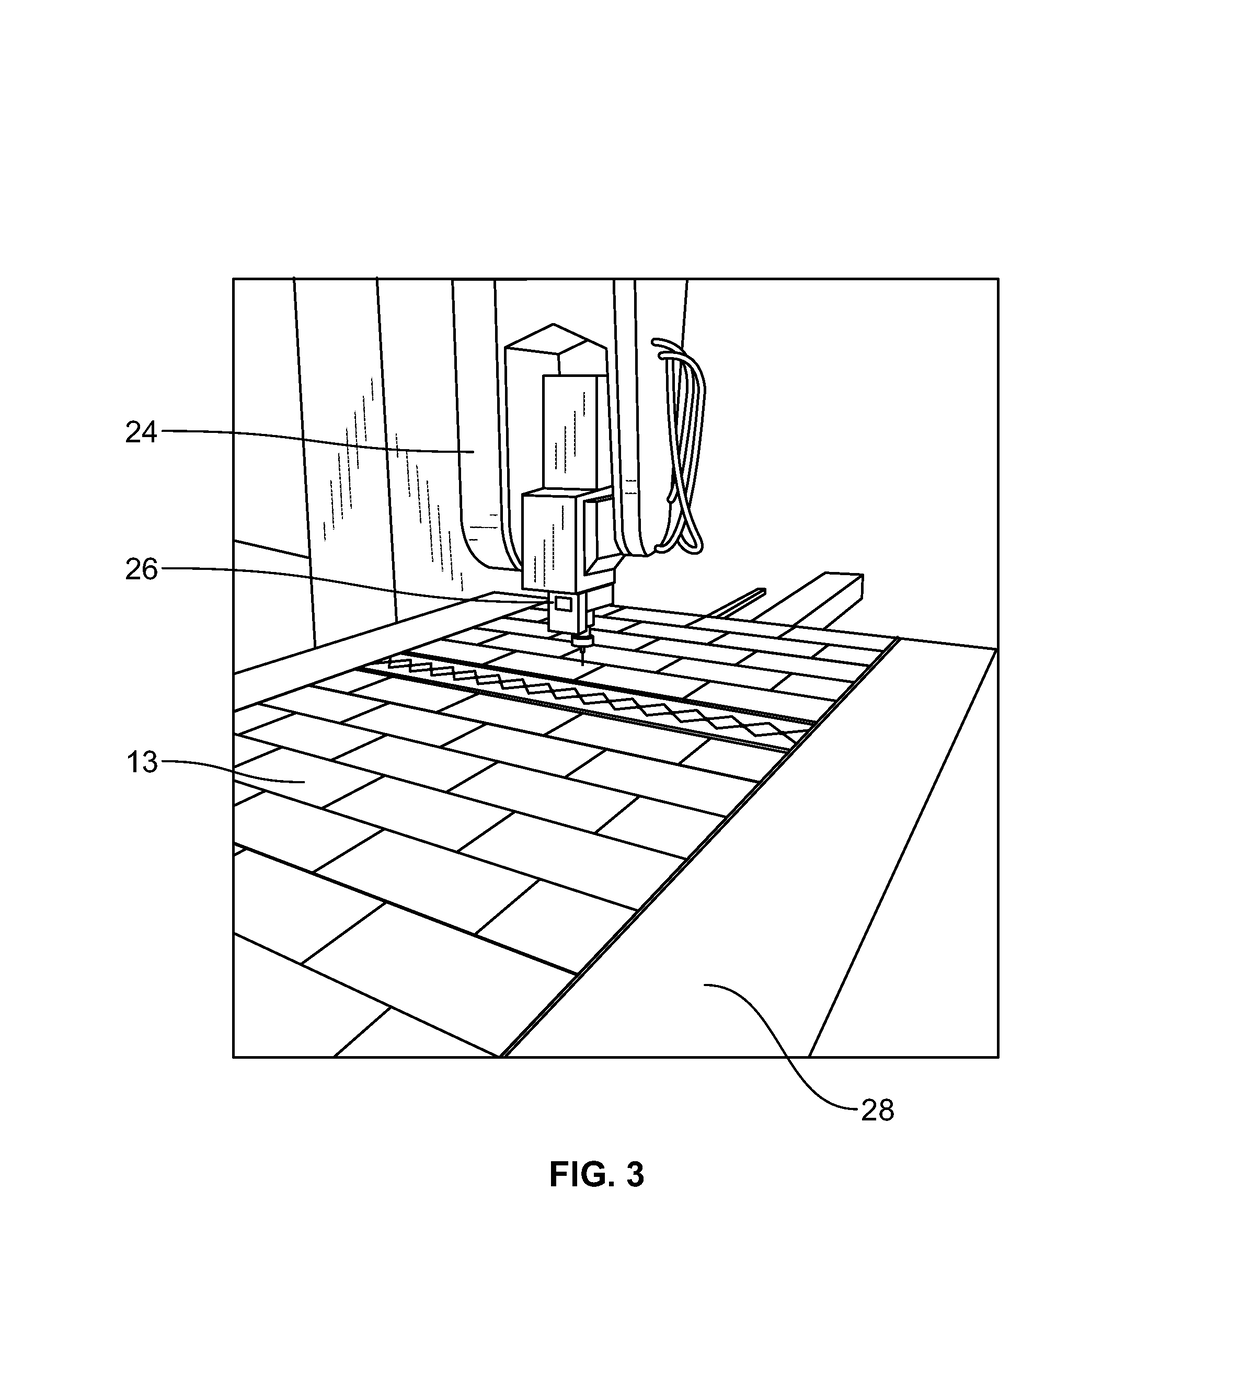 Method for creating simulated tile wall